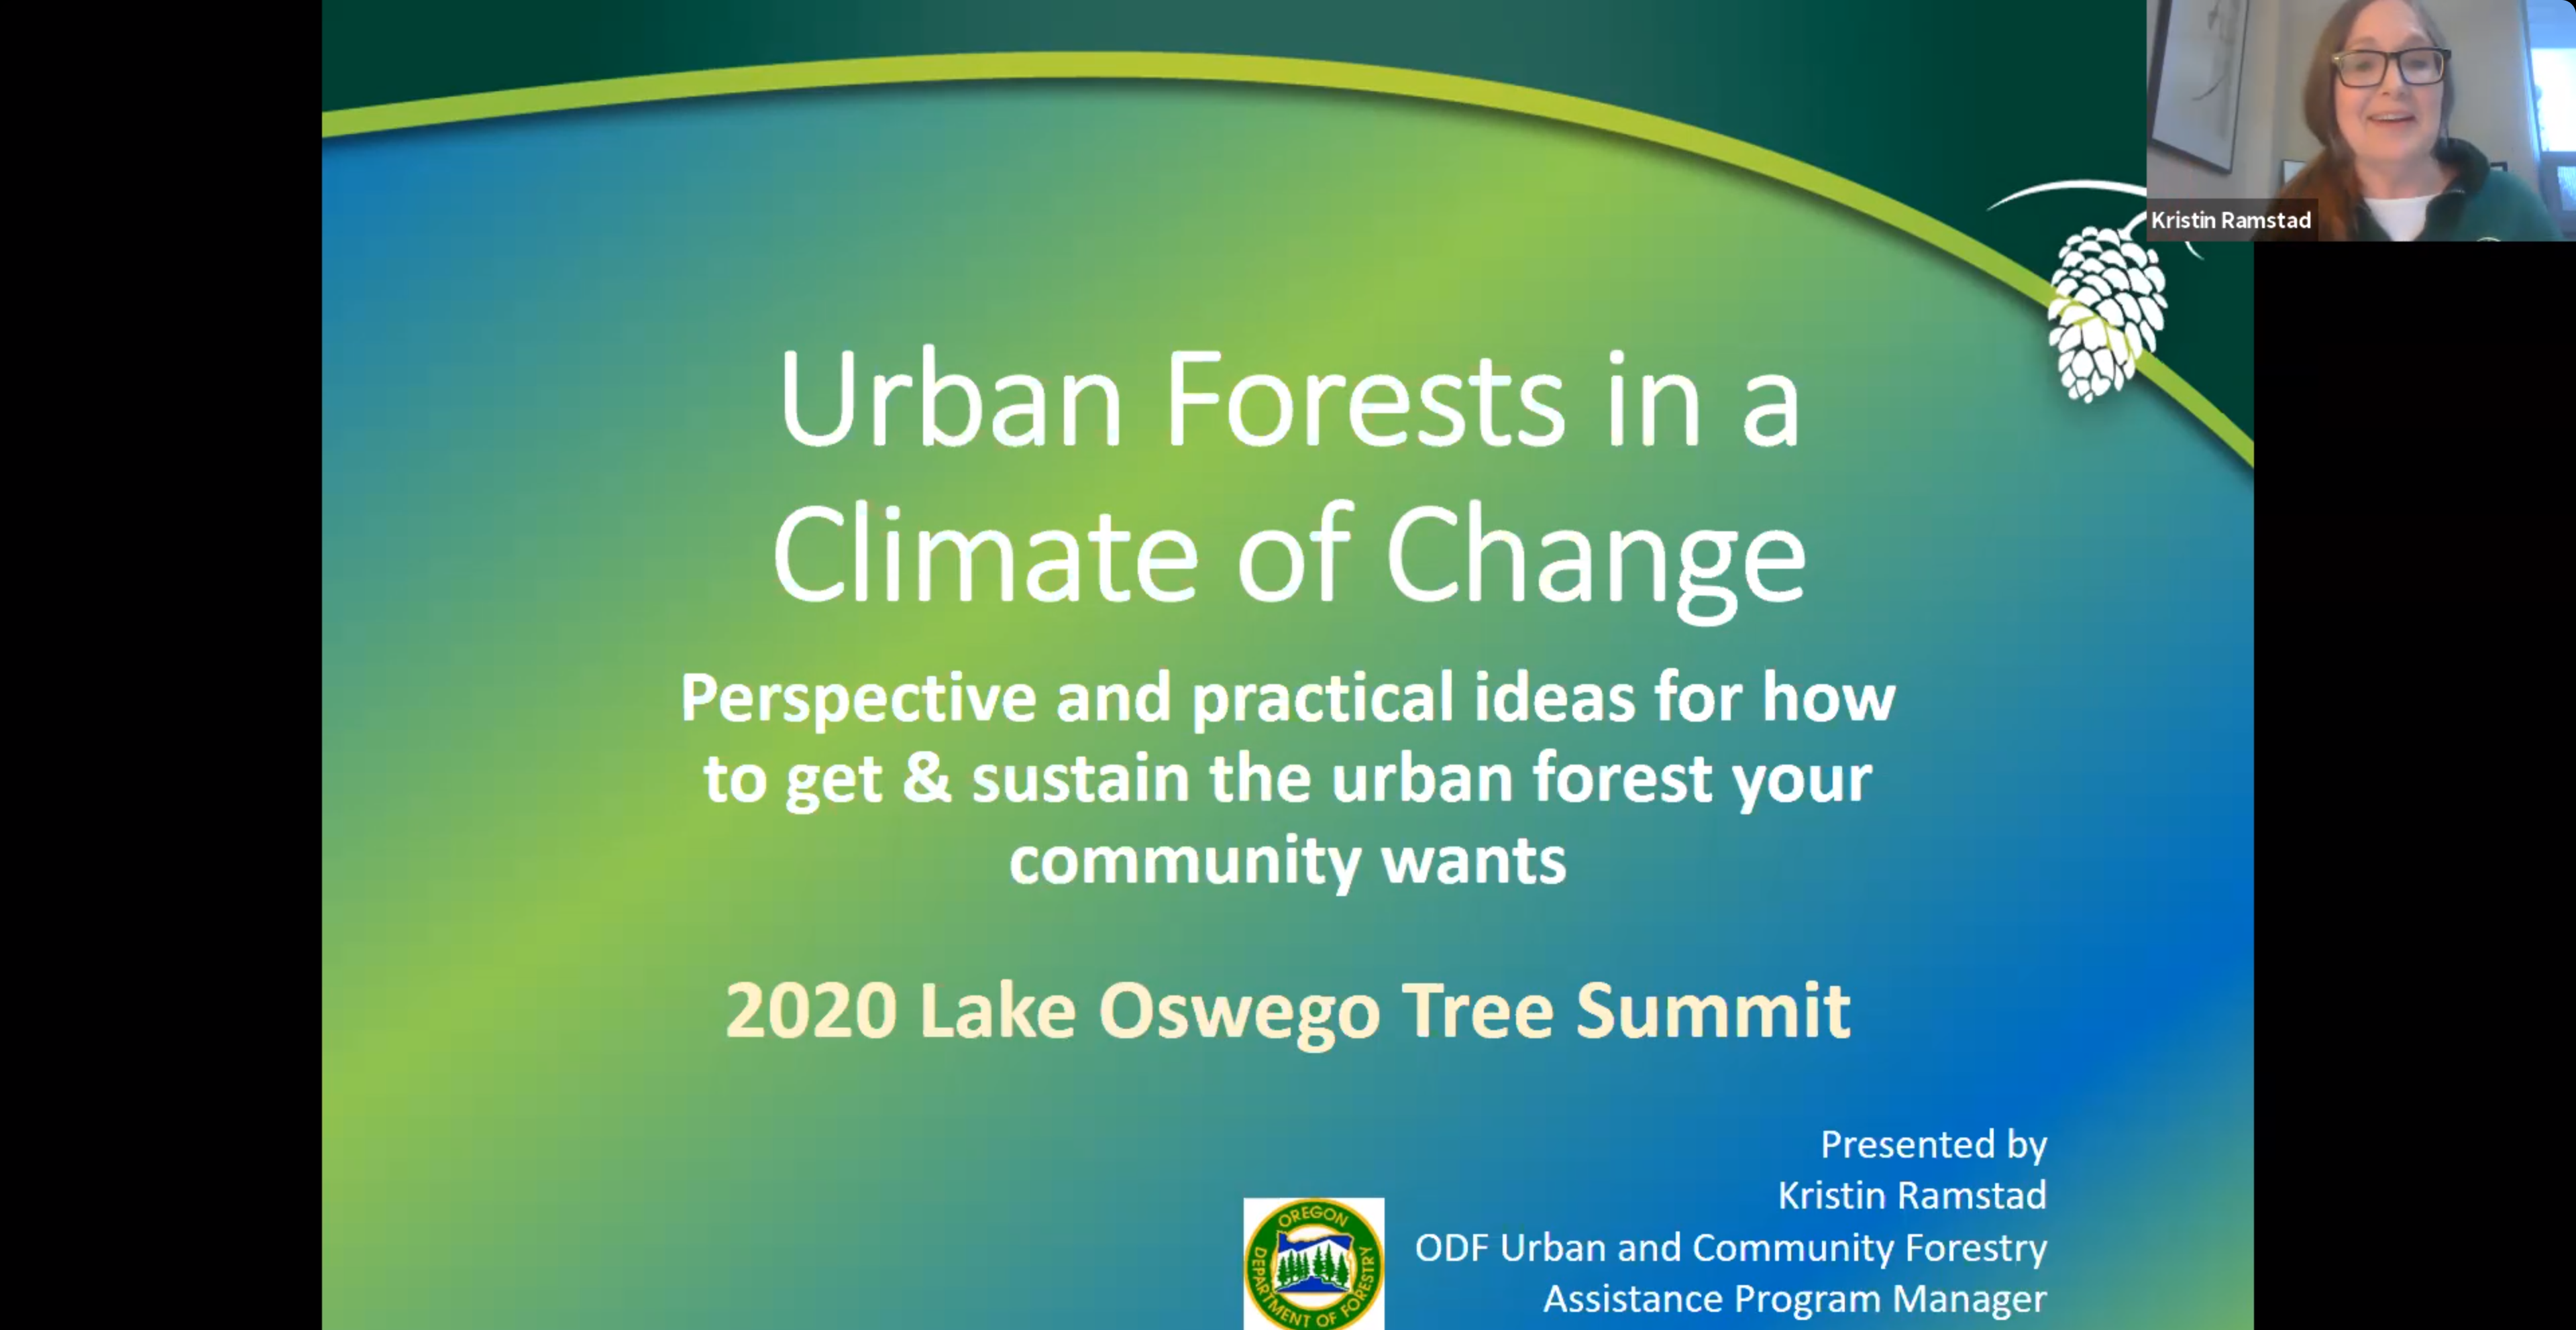 Kristen Presents at the 2020 Tree Summit. We see a screen grab of Kristen and her presentation on Zoom. On screen we see "Urban Forests in a Climate of Change"